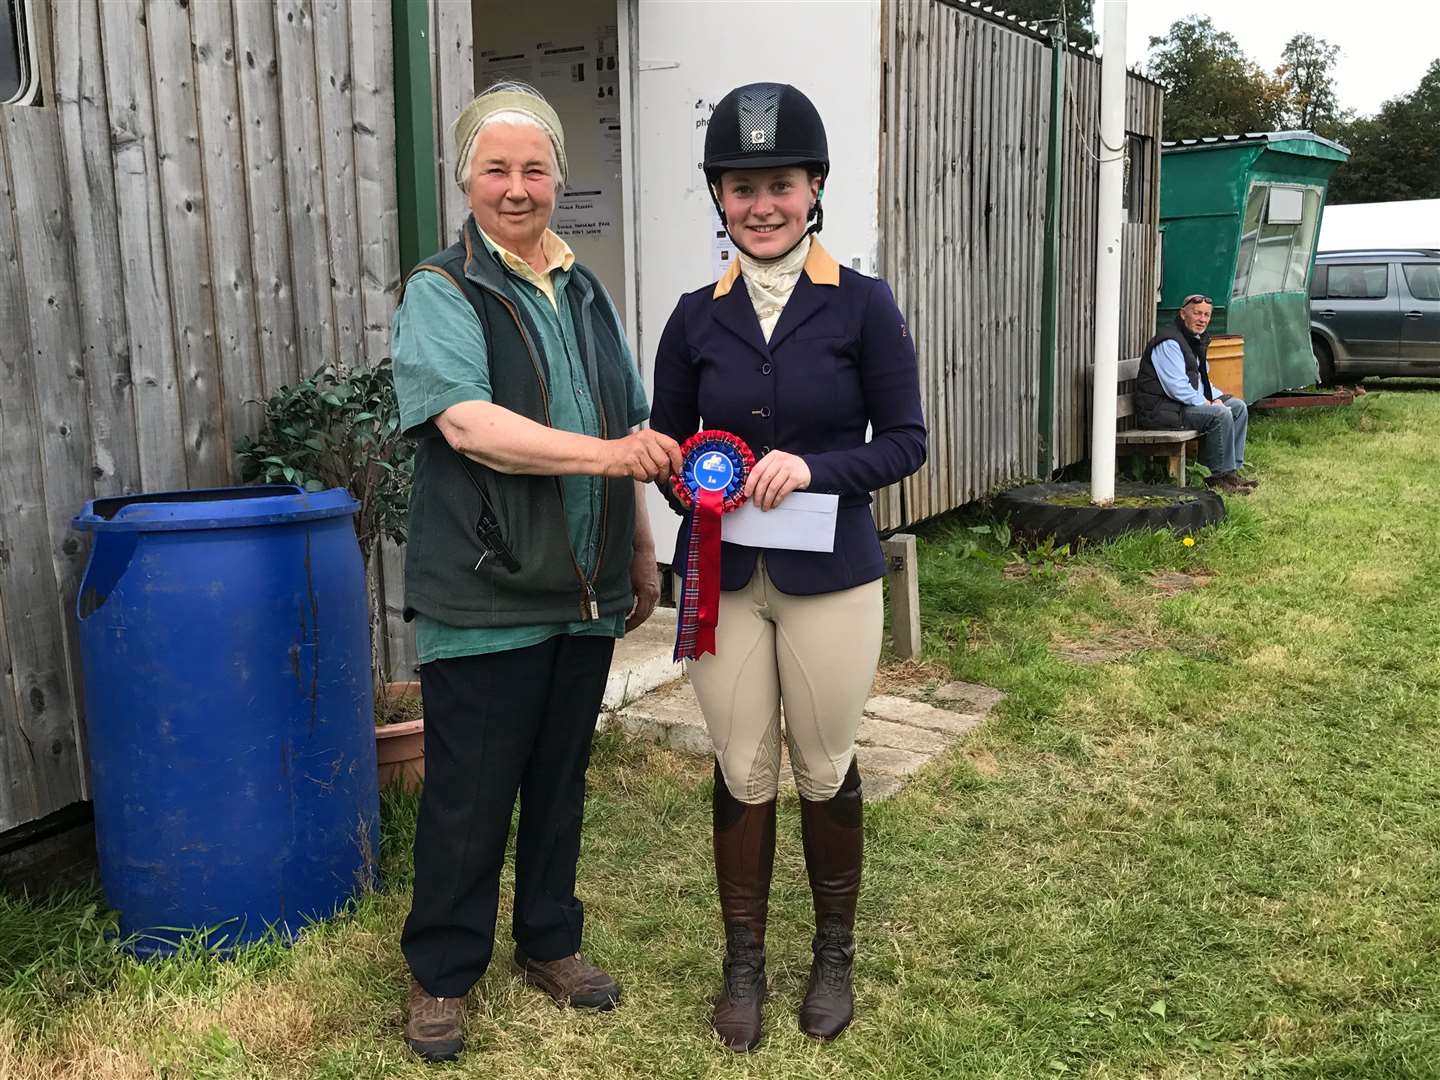 Emma Coghill is presented with her first prize in the novice section at Wee Burgie by Polly Lochore, landowner and course designer.